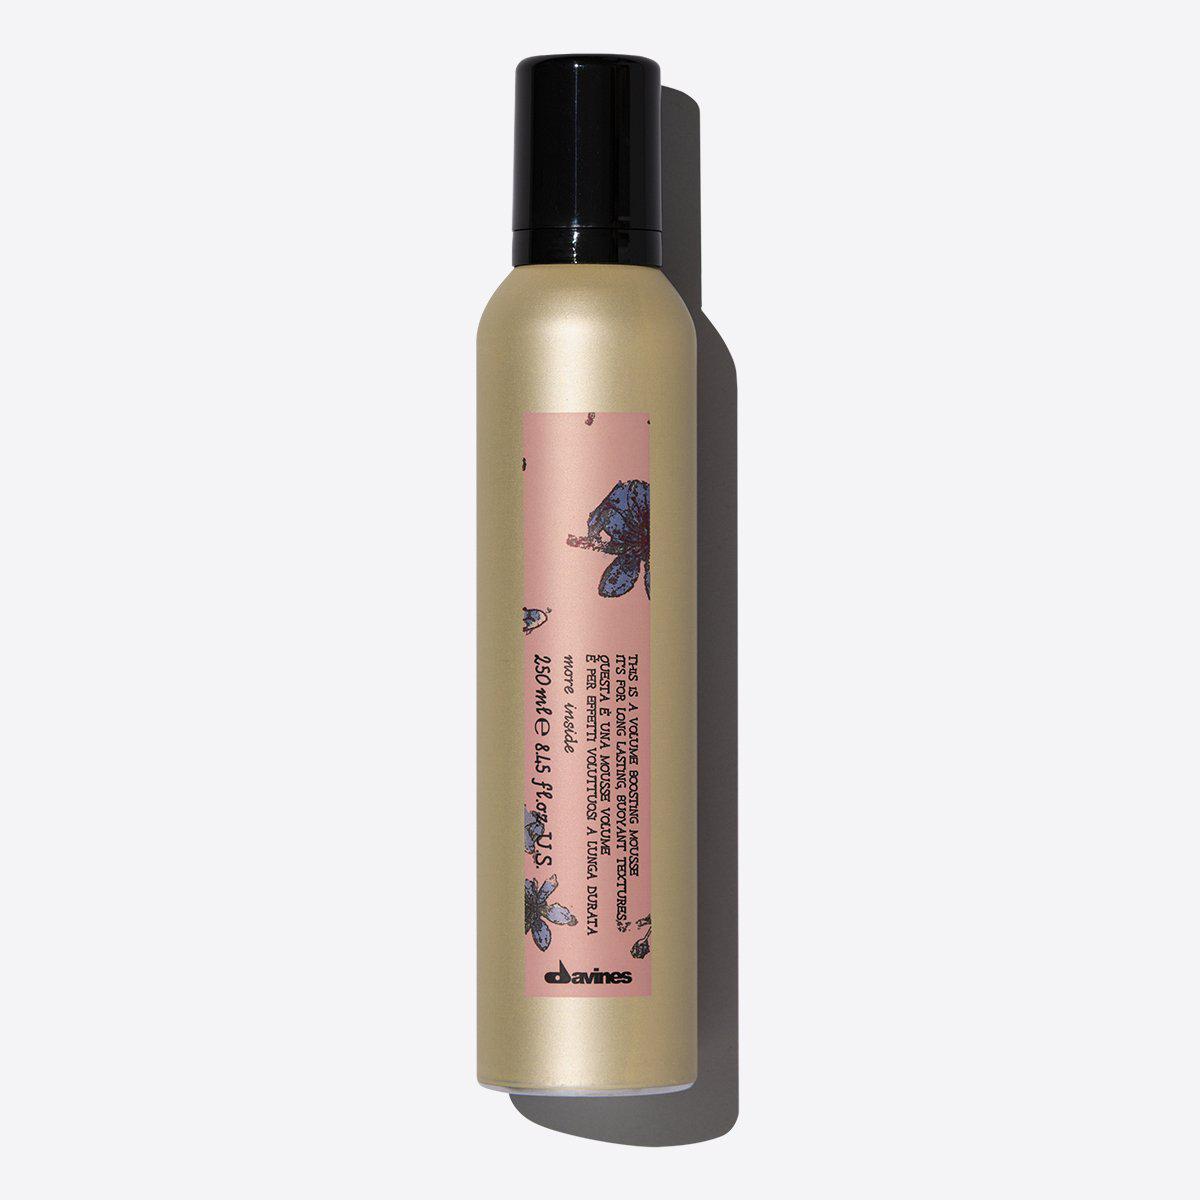 Davines This Is A Volume Boosting Mousse 250ml